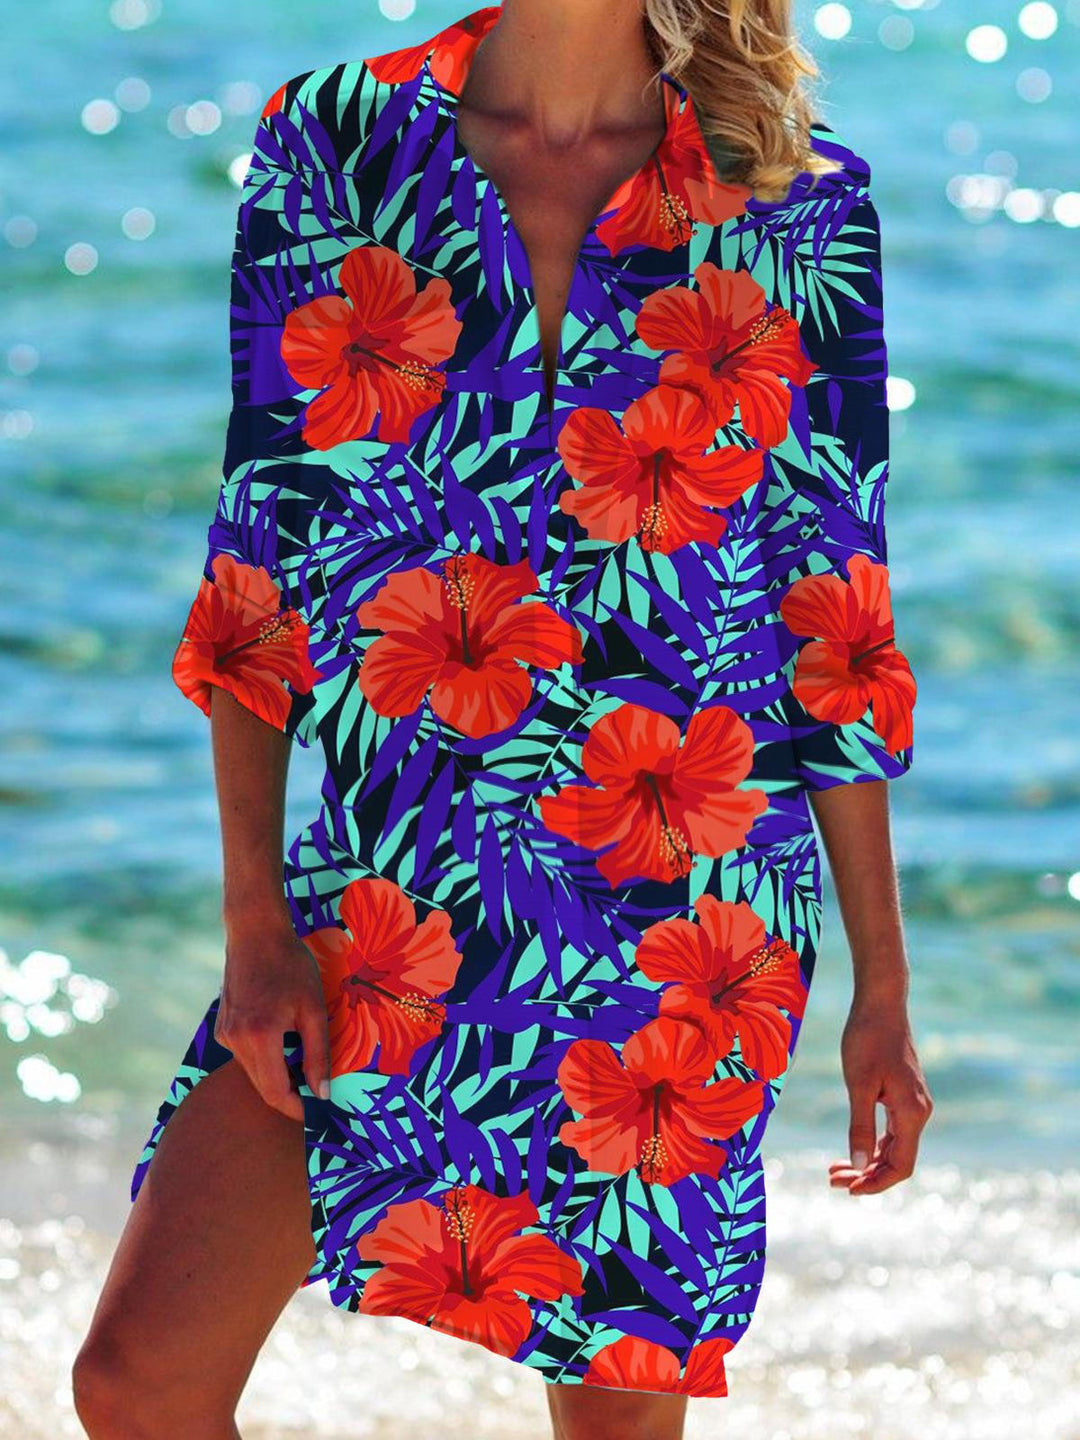 Hibiscus Tropical Flowers And Leaves Long Sleeve Beach Shirt Dress